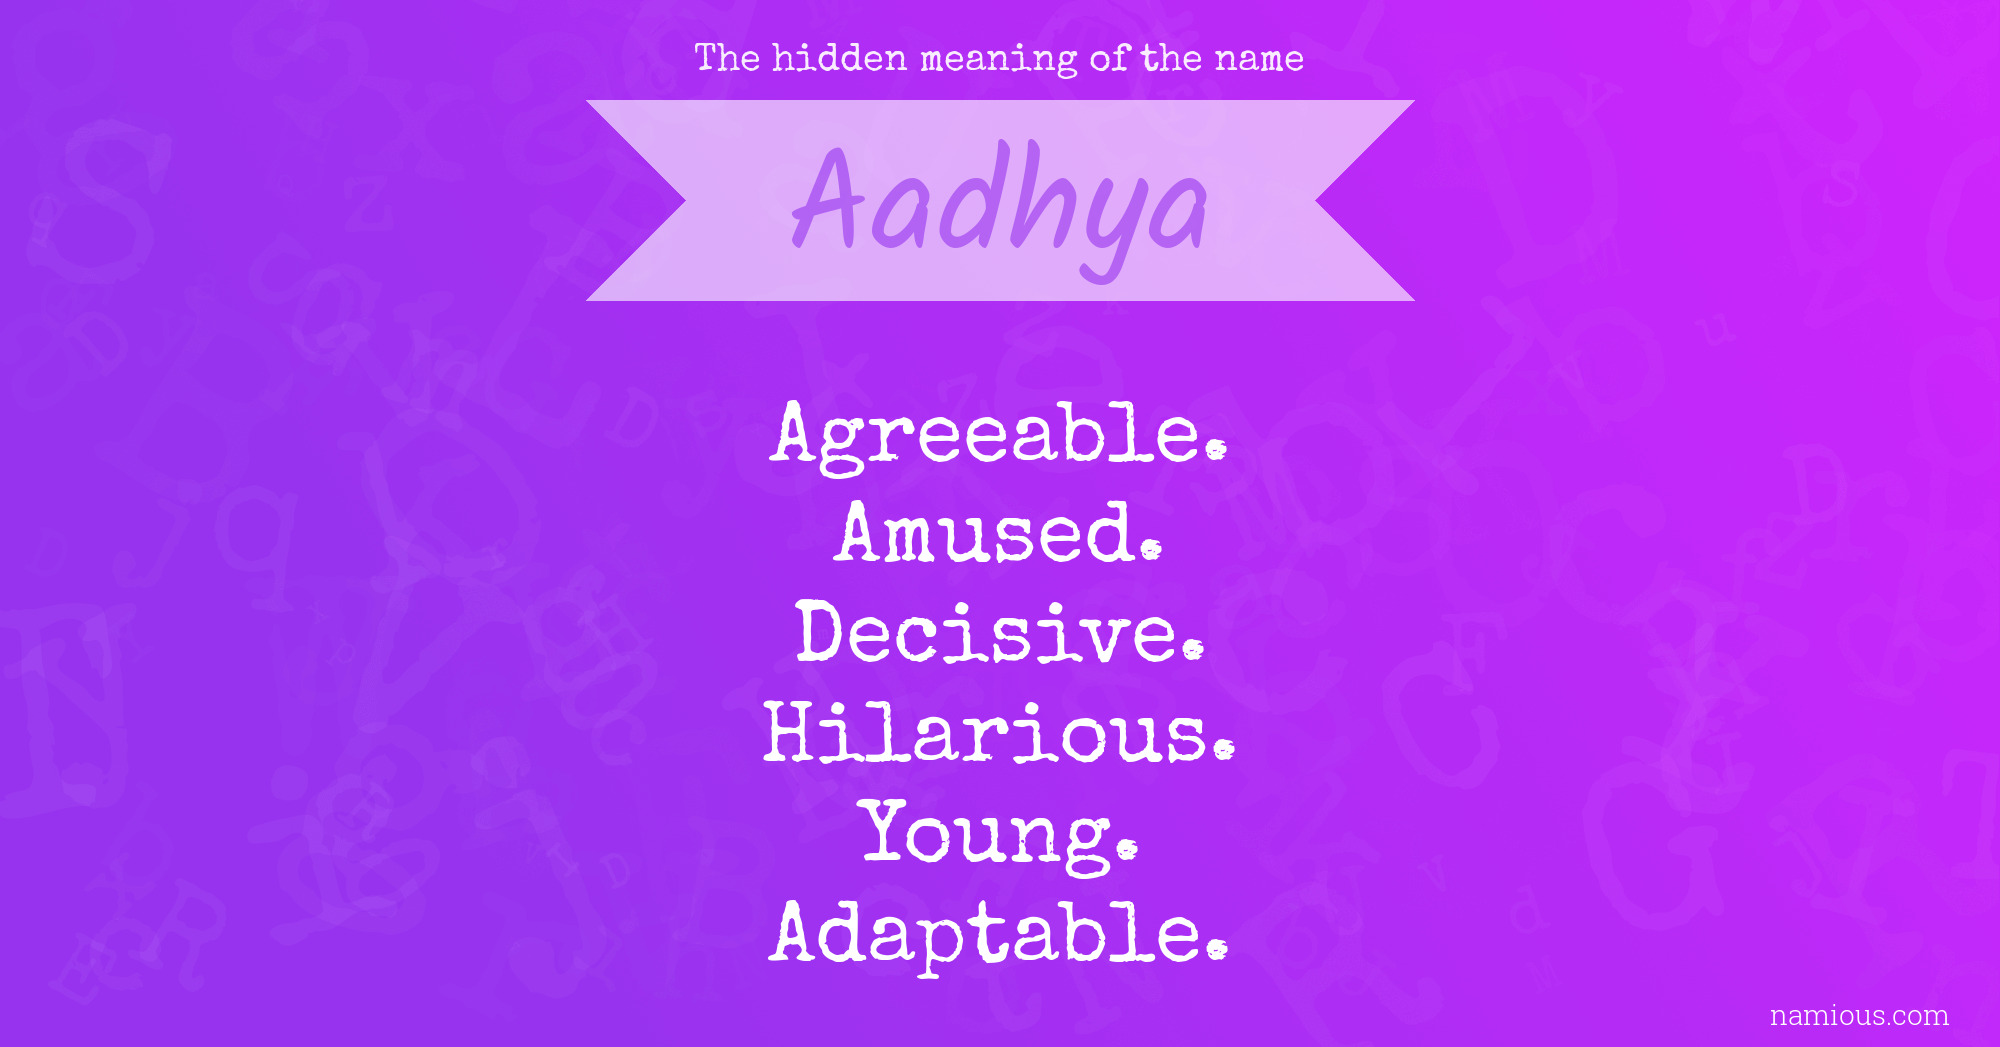 The hidden meaning of the name Aadhya